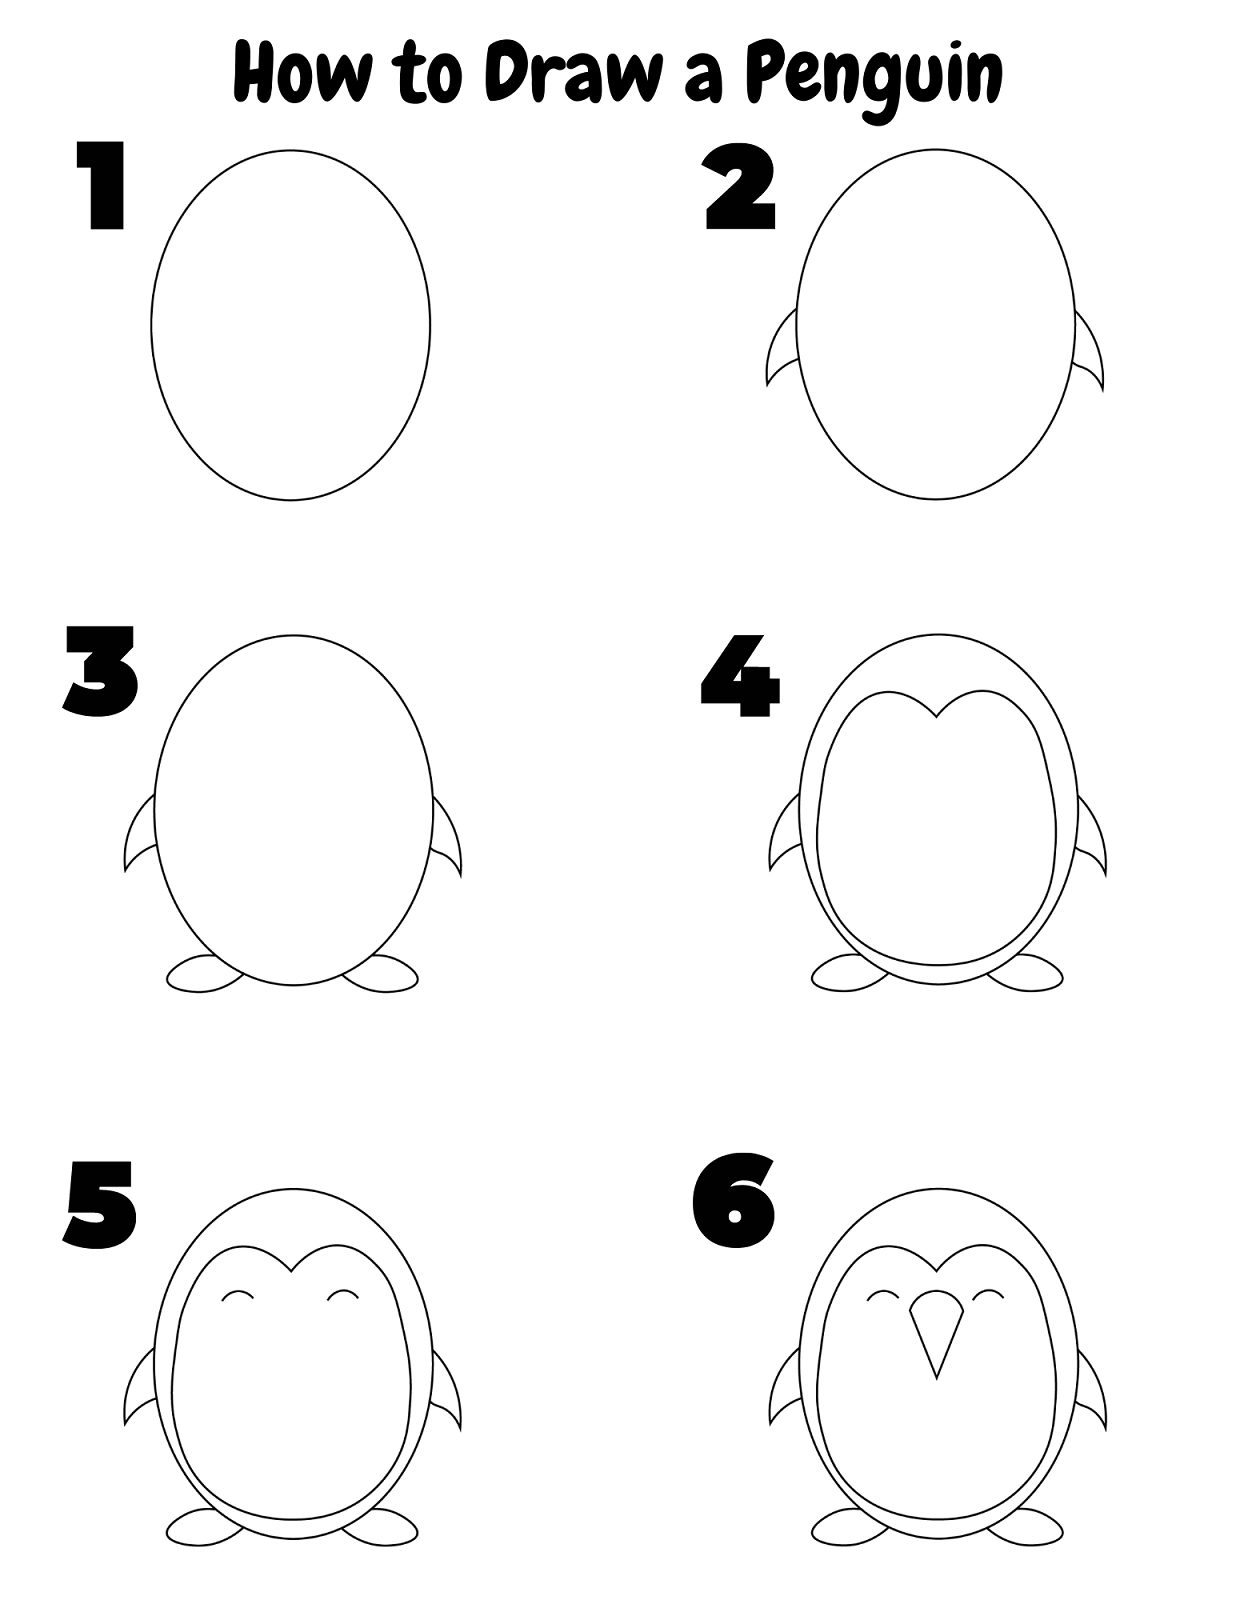 Penguin Drawing Tutorial - How to draw Penguin step by step